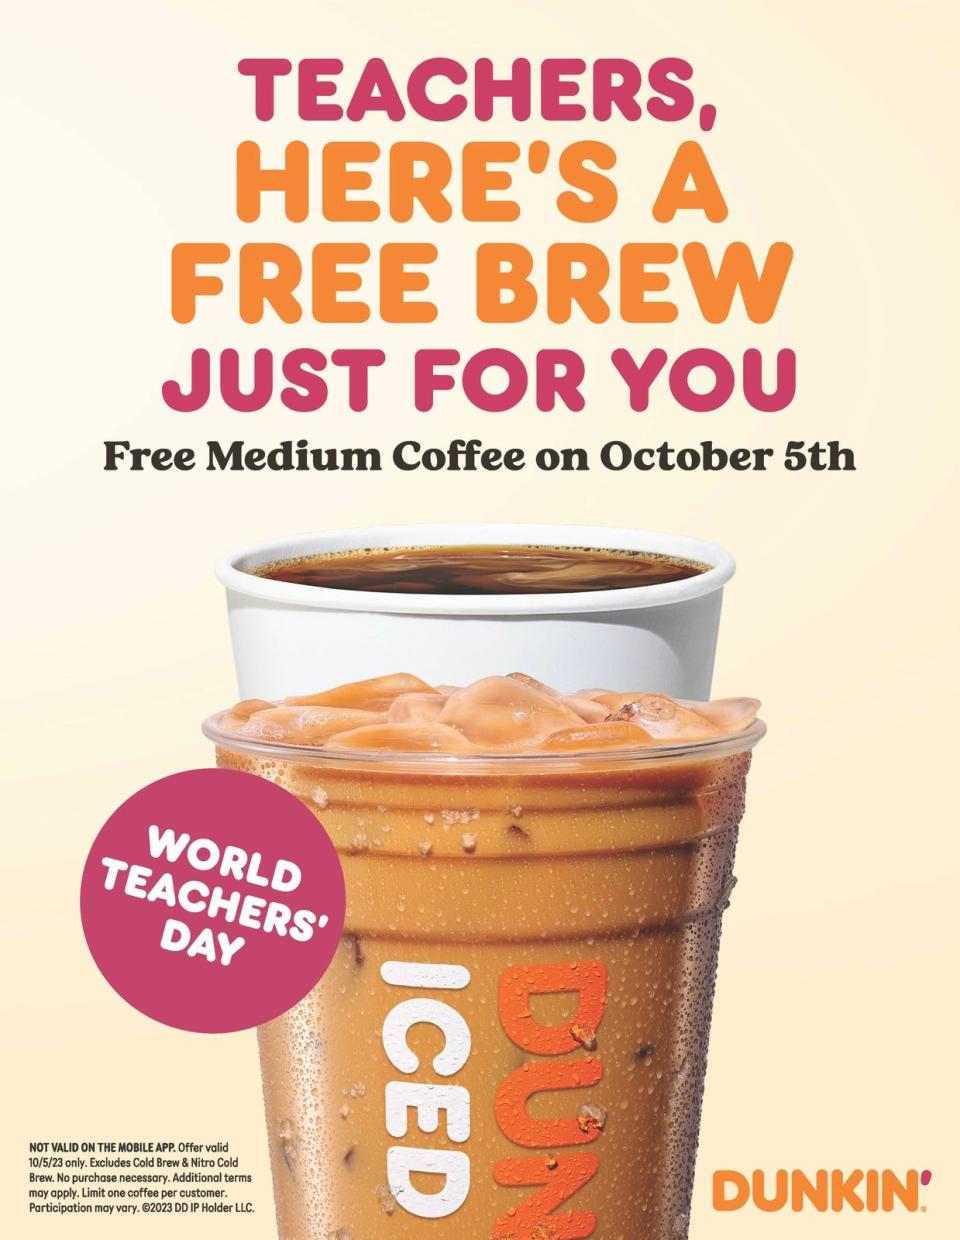 Dunkin’ is celebrating World Teachers’ Day Thursday on Oct. 5 by treating teachers to free cup of Joe, the chain said.